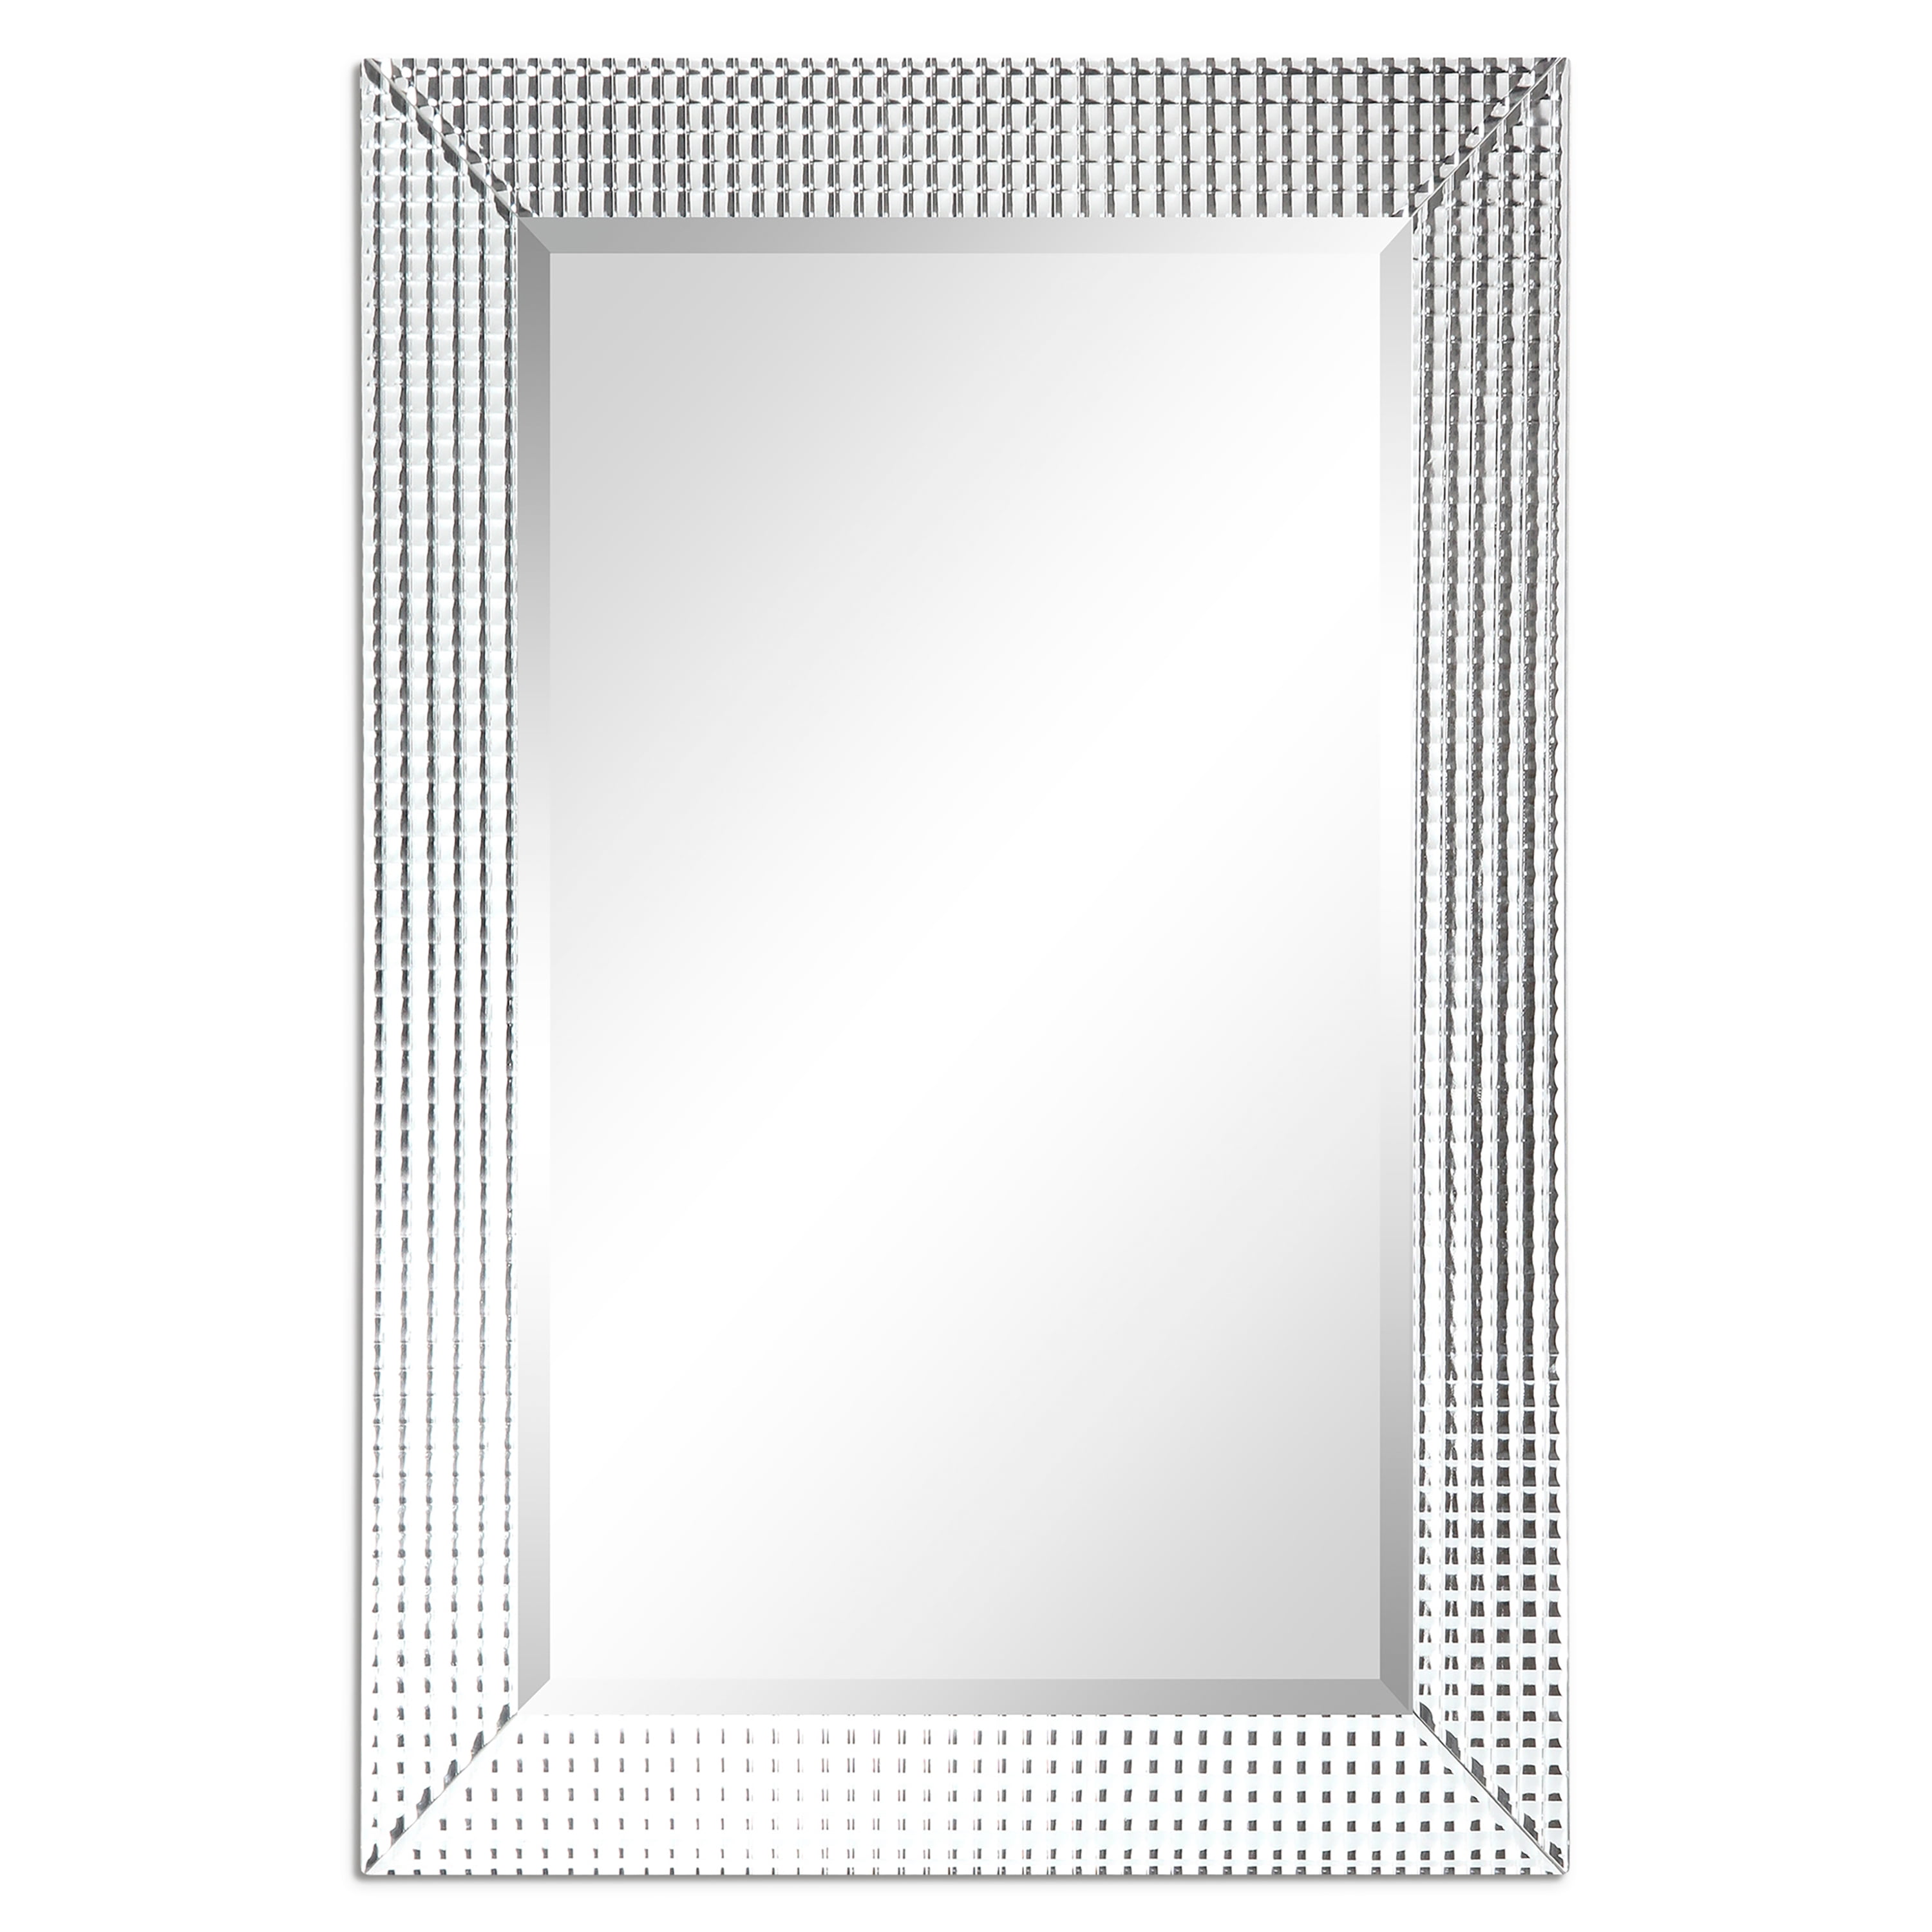 Empire Art Direct Bling Beveled Glass Mirror 24 inch x 36 inch Ready to Hang Clear